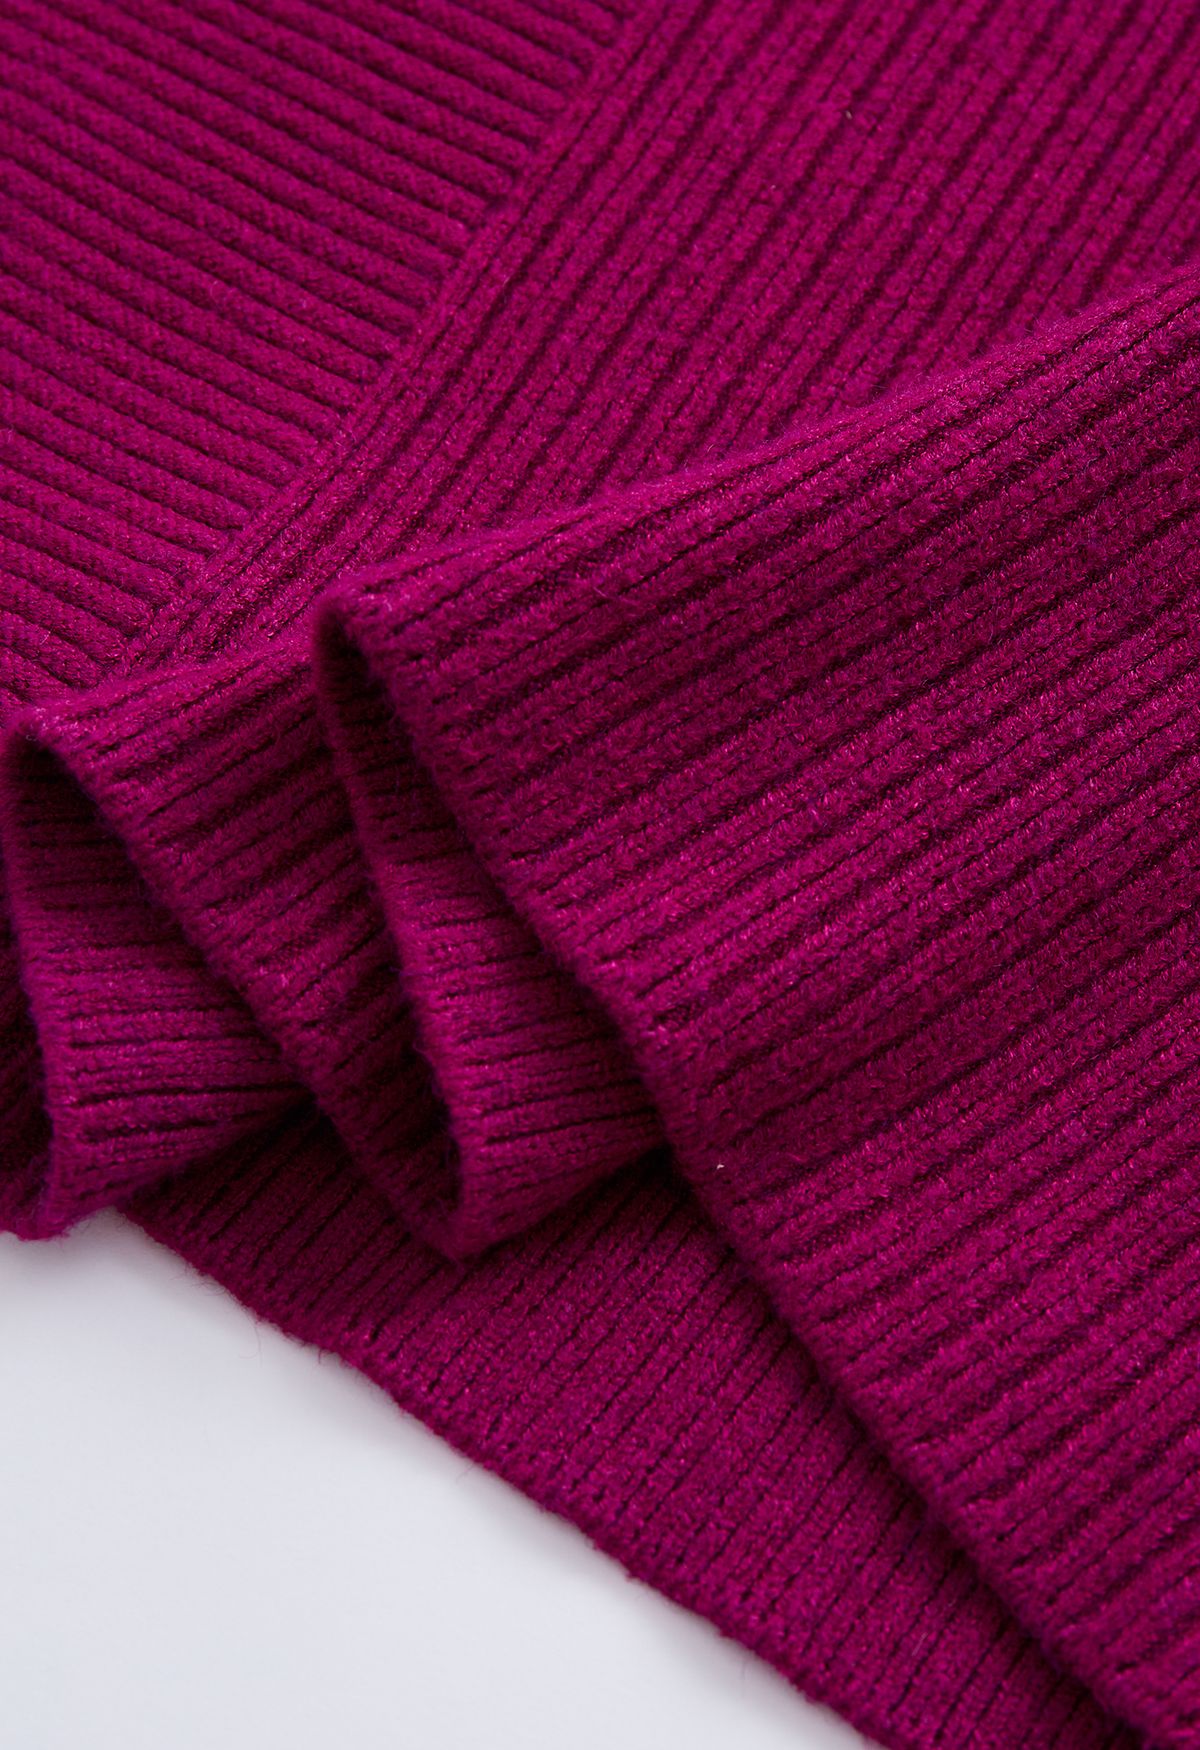 Asymmetric Batwing Sleeve Sweater and Pants Knit Set in Magenta